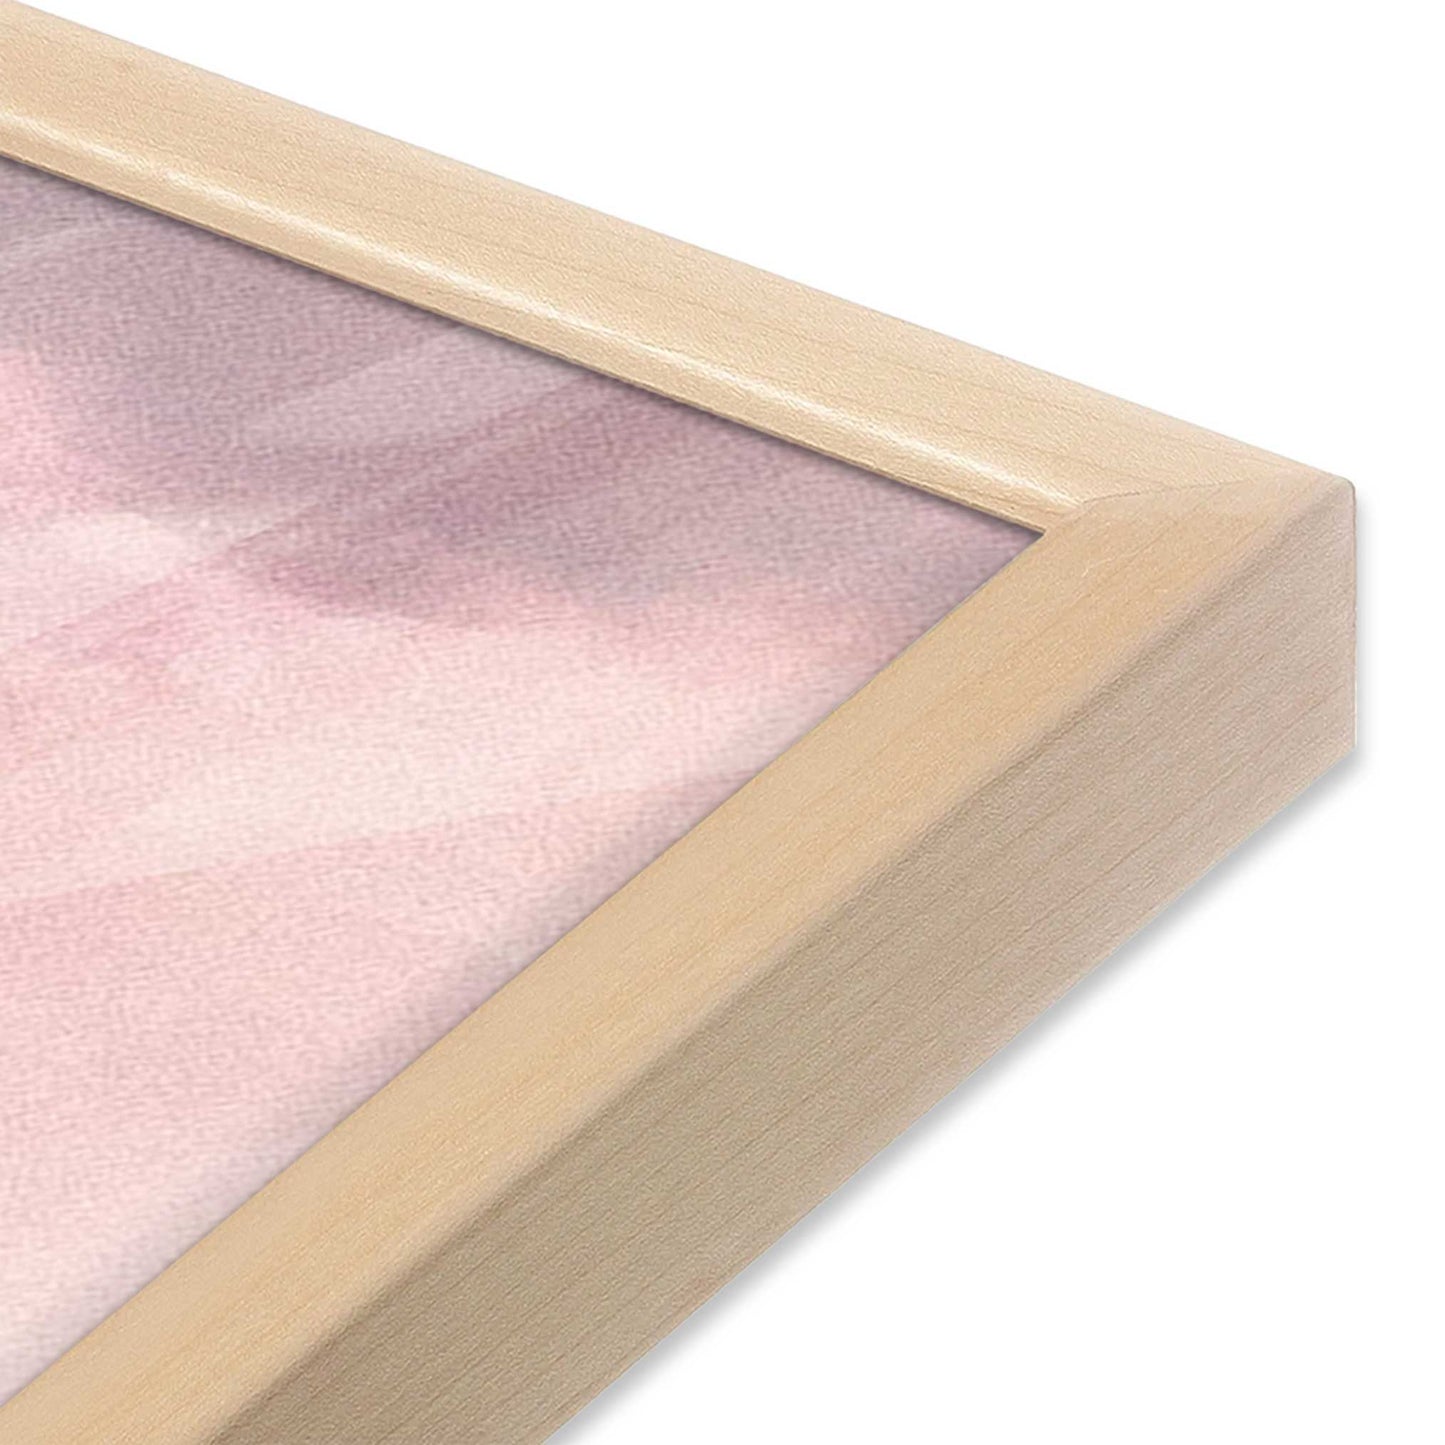 [Color:Raw Maple] Picture of art in a Raw Maple frame of the corner